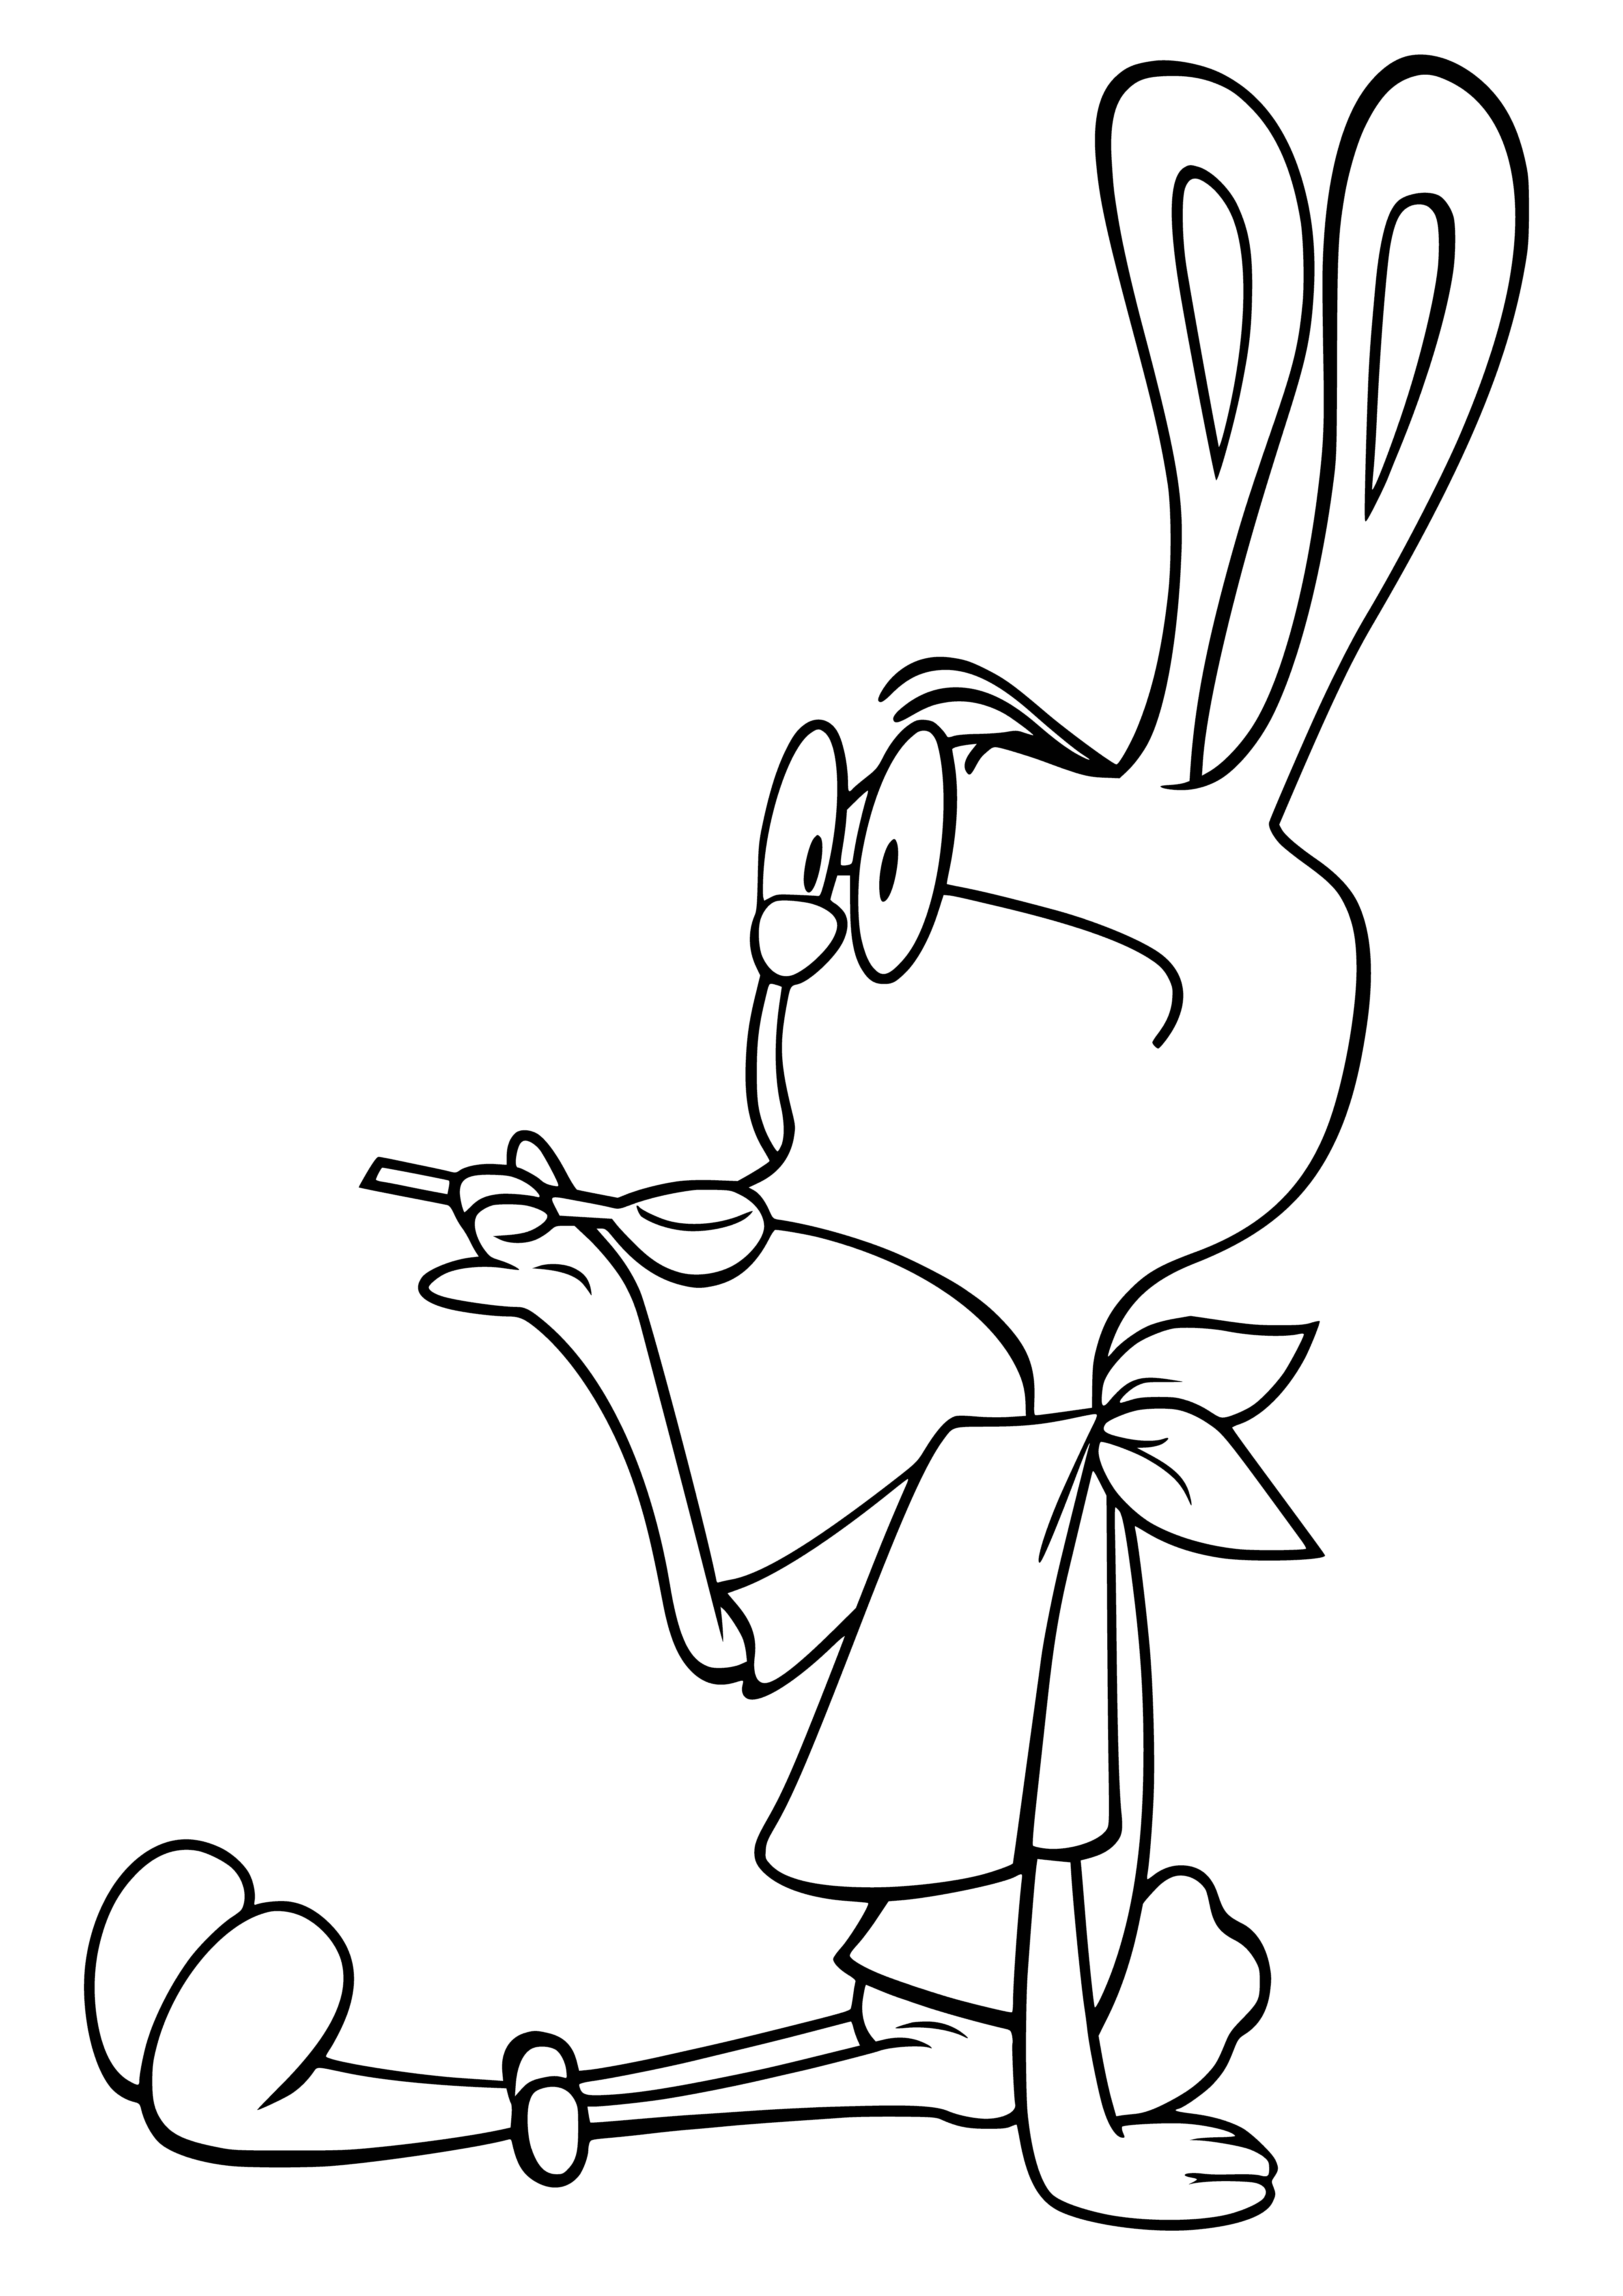 coloring page: Cartoon rabbit wearing red shirt and blue jacket holding yellow balloon in front of house.